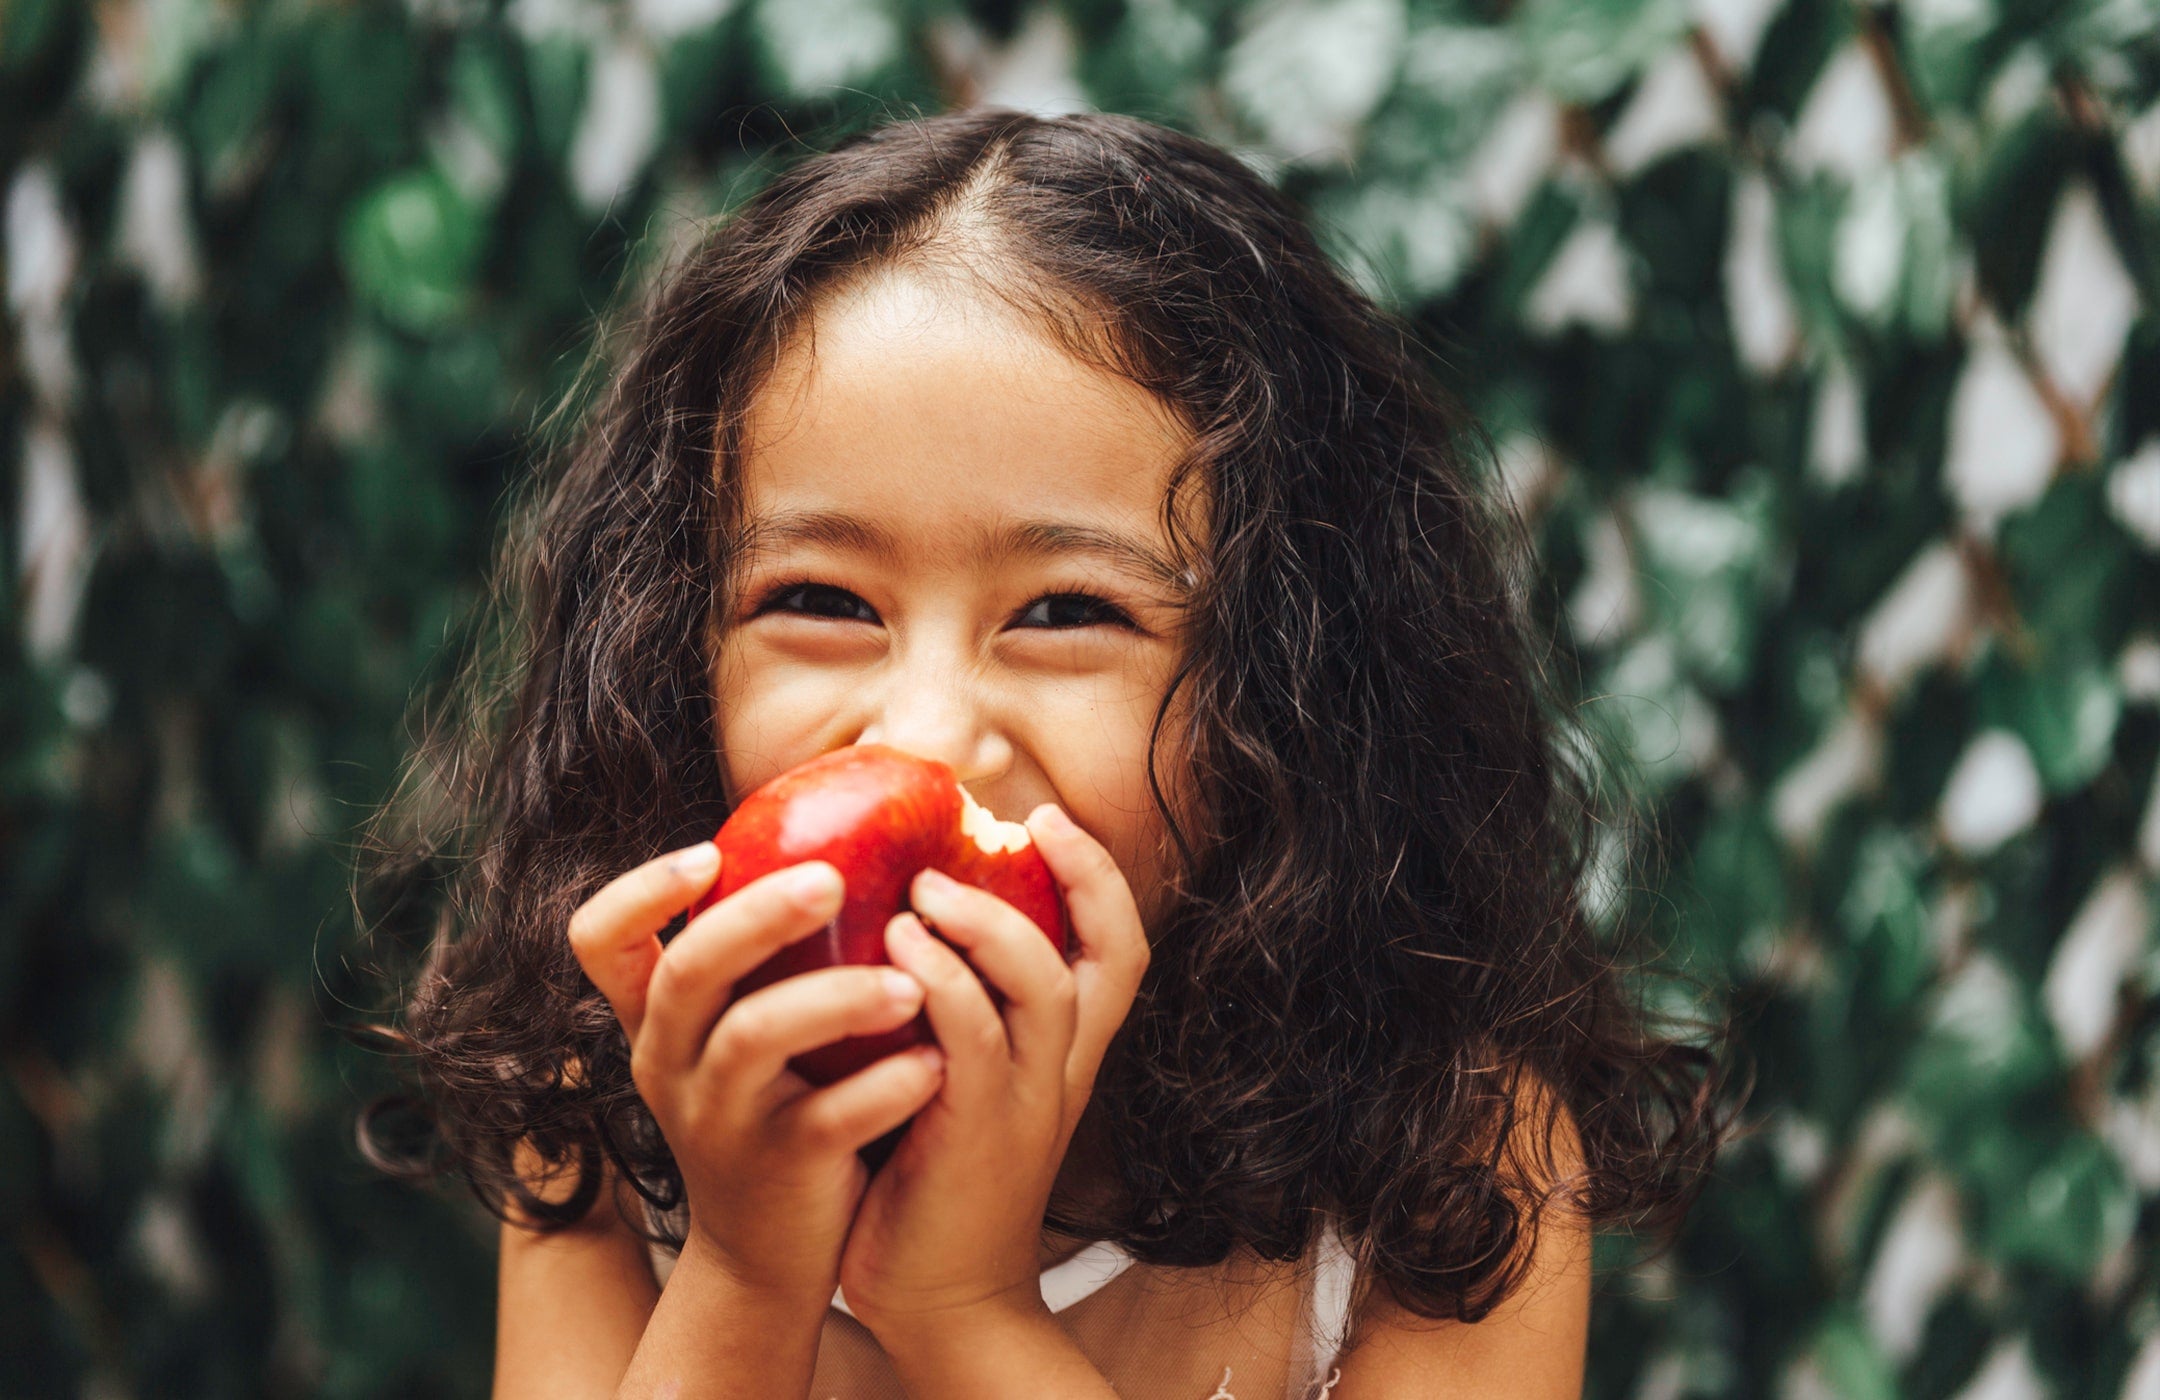 7 Baby- and Kid-Friendly Ways to Serve Apples